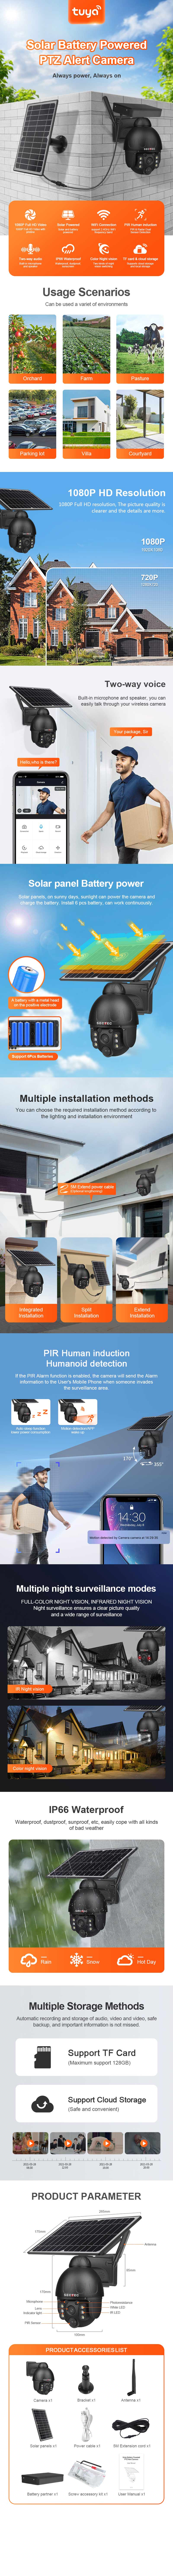 SECTEC 4G European Version Solar Camera Outdoor 1080P HD Cam Intelligent PIR Human Detection Two-way Audio Color Night Vision IP66 Waterproof for Home Security Cameras